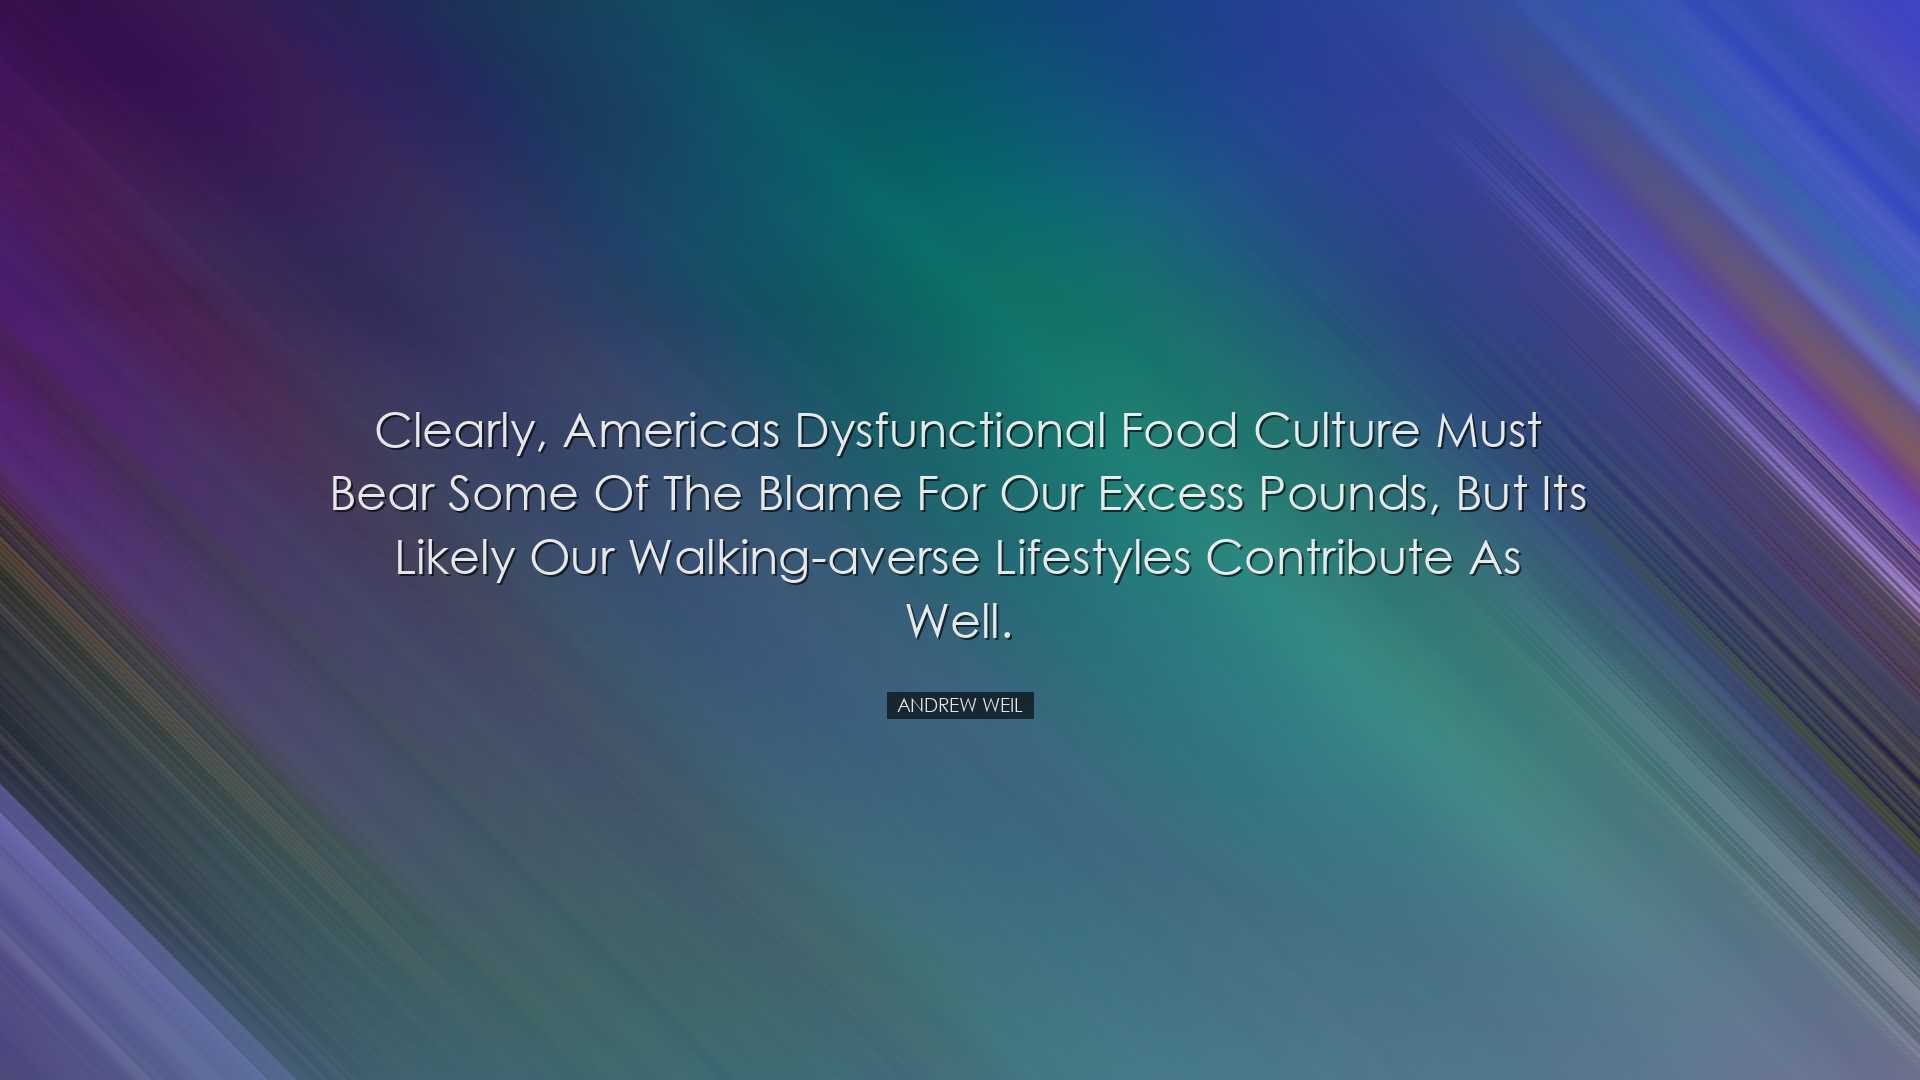 Clearly, Americas dysfunctional food culture must bear some of the